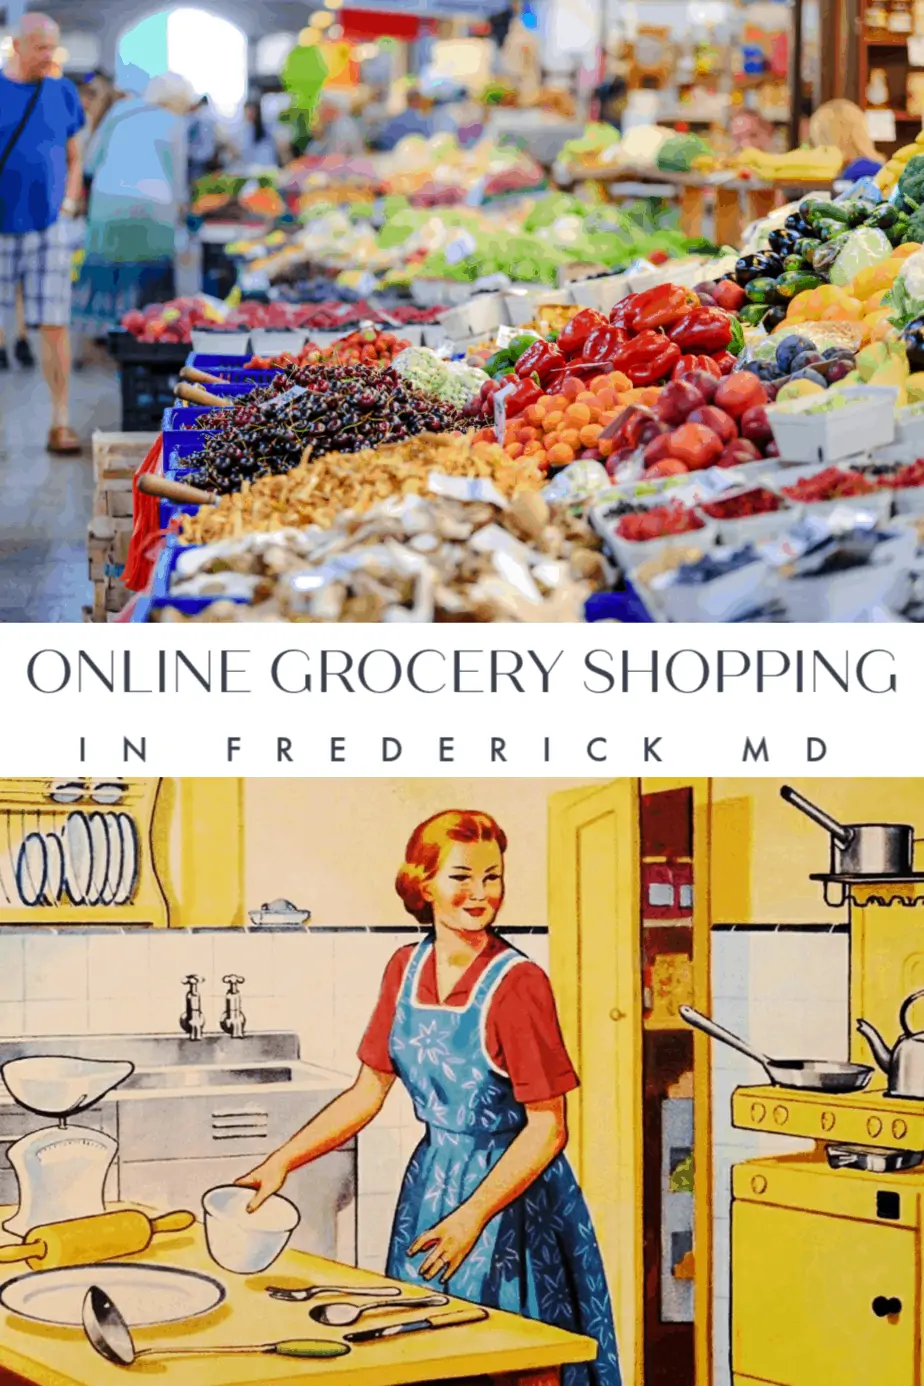 Online Grocery Shopping in Frederick, Md